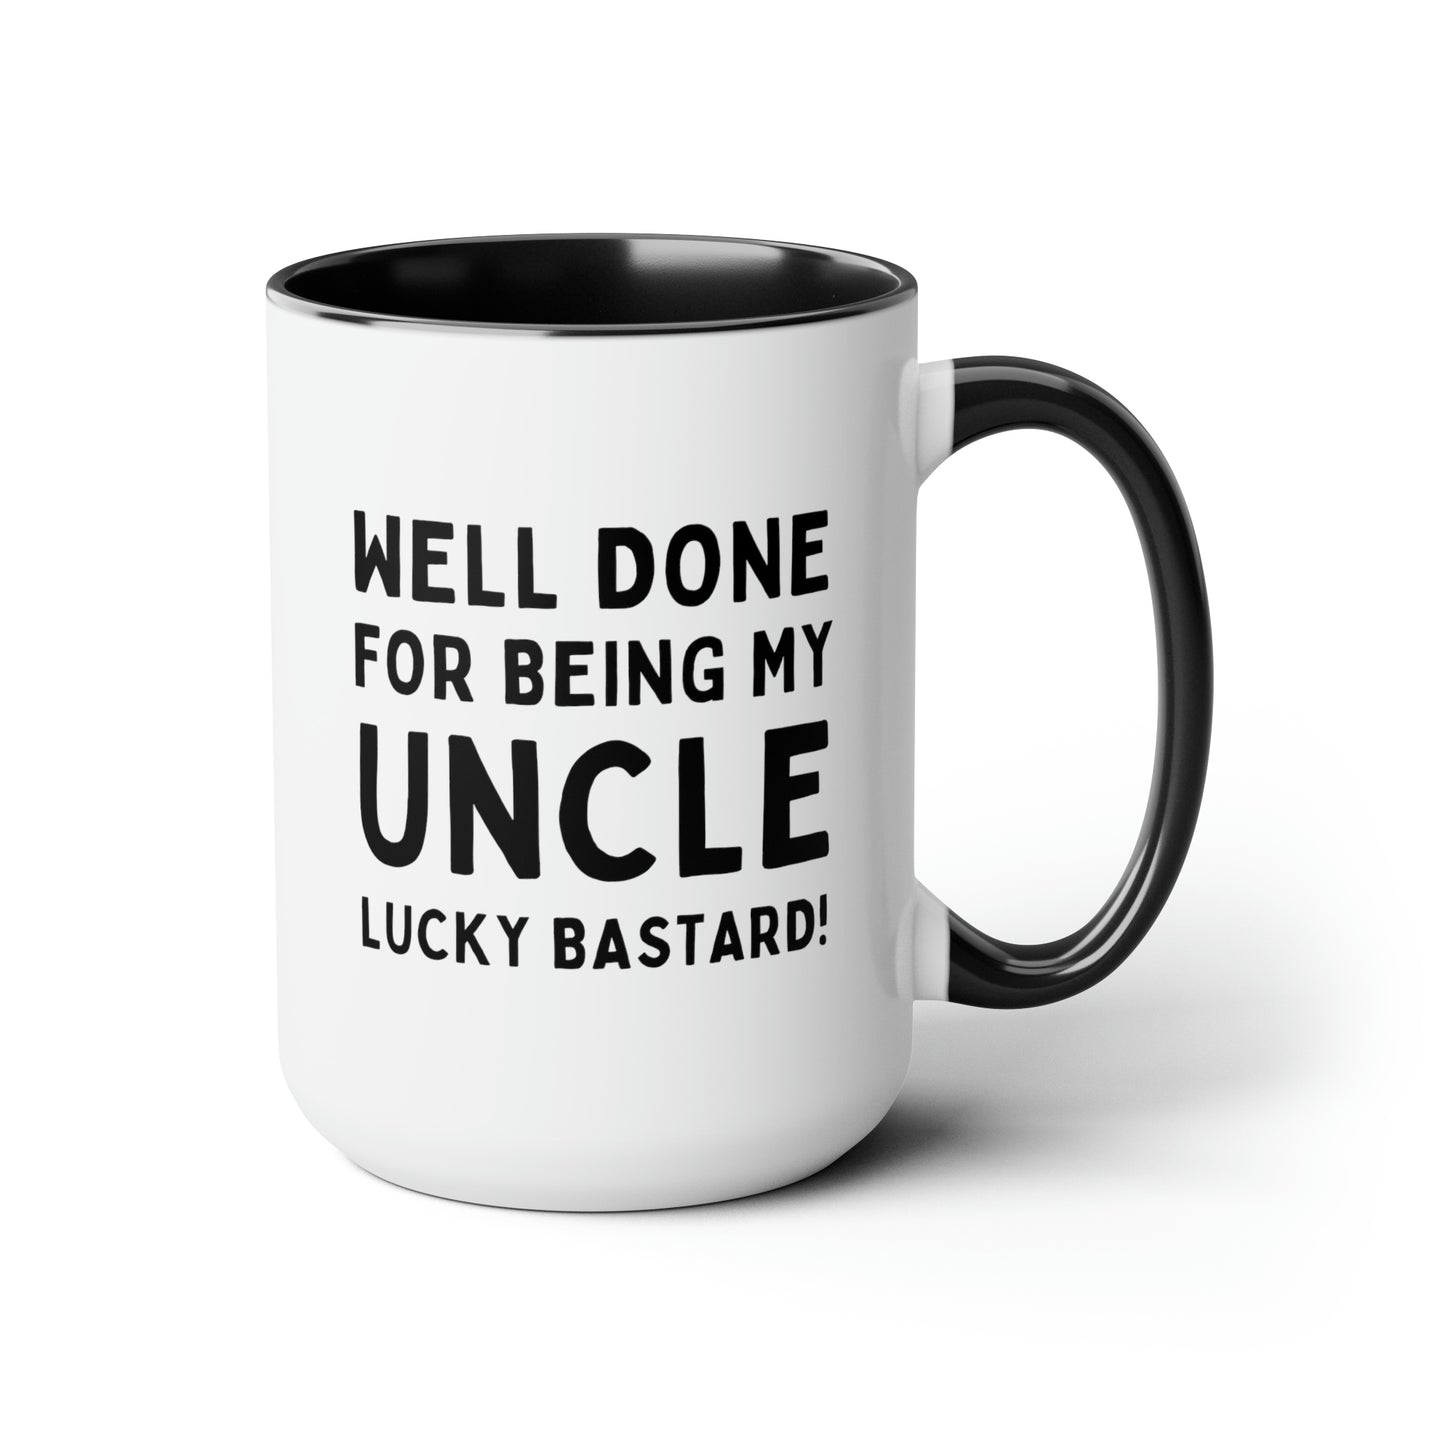 Well Done For Being My Uncle Lucky Bastard 15oz white with black accent funny large coffee mug gift for uncle congrats birthday waveywares wavey wares wavywares wavy wares